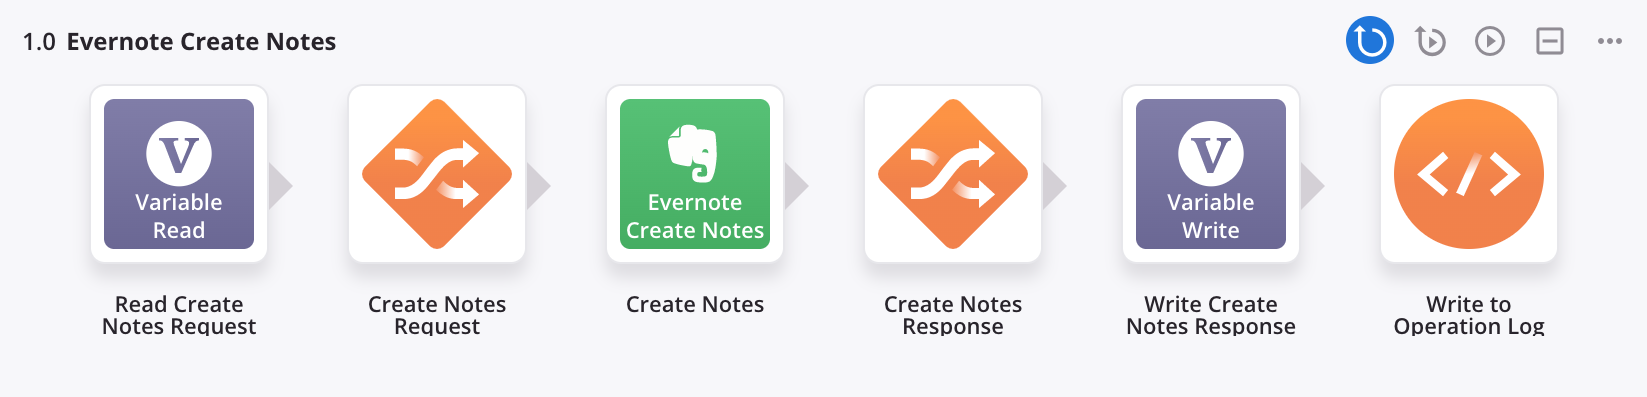 Evernote Create Notes operation